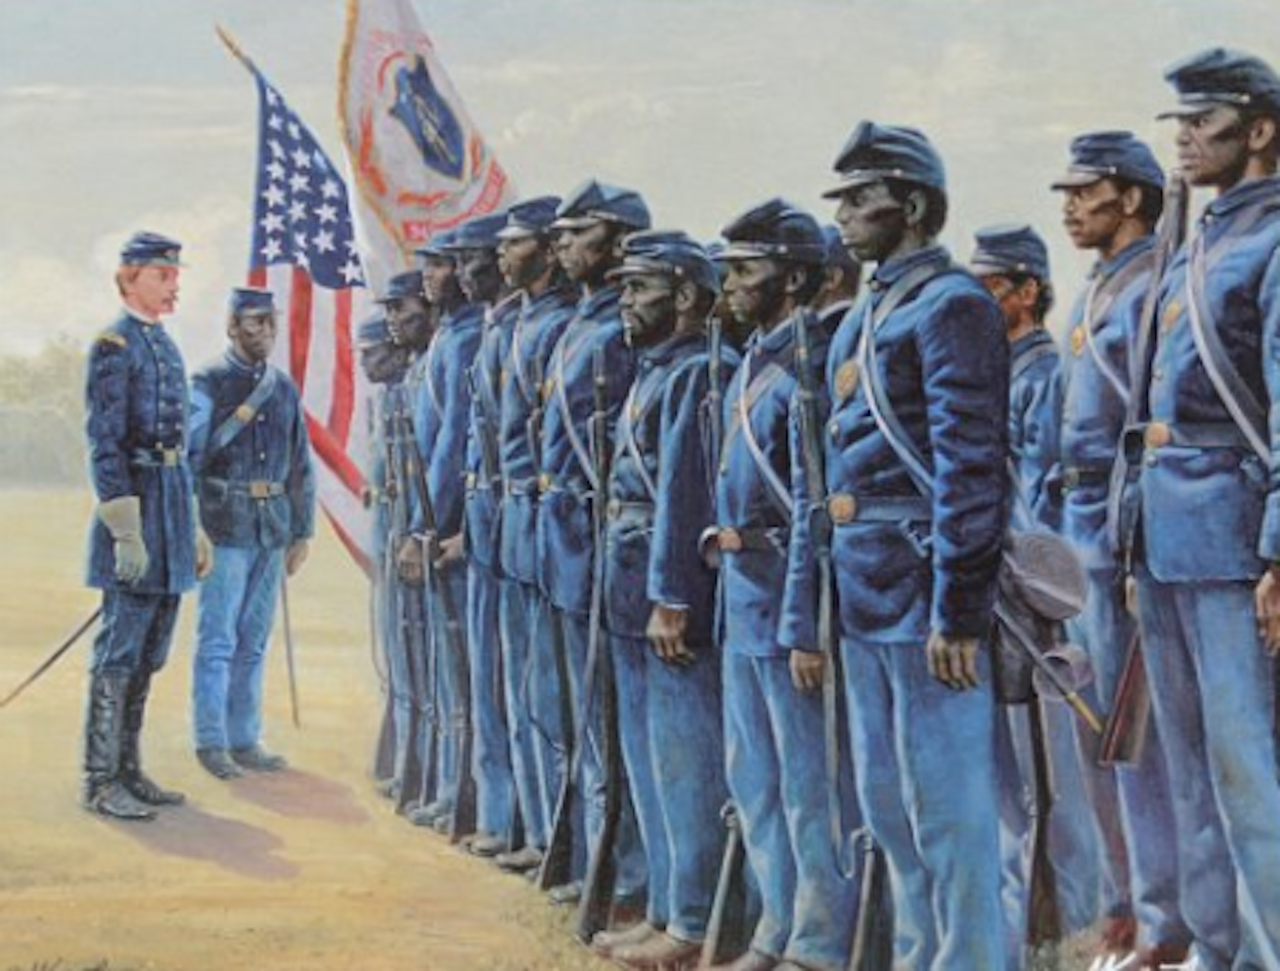 Before it was accepted by the country, Robert Gould Shaw was pushed to command the 54th Massachusetts regiment of all African-American soldiers, paving the way to equality